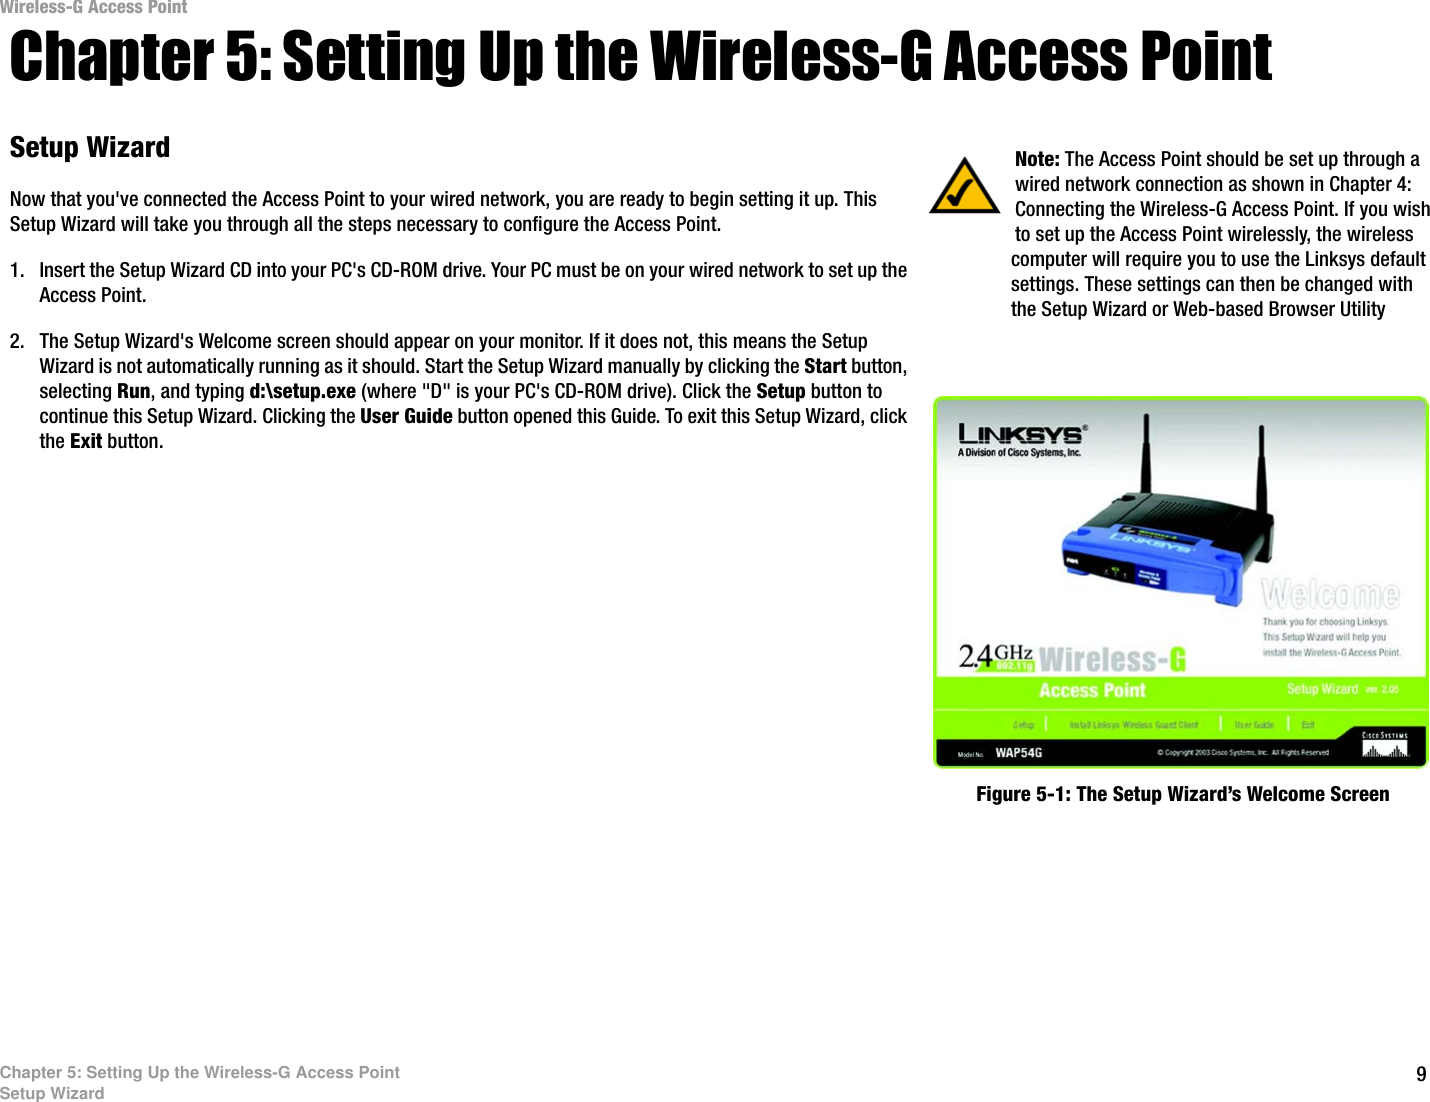 9Chapter 5: Setting Up the Wireless-G Access PointSetup WizardWireless-G Access PointChapter 5: Setting Up the Wireless-G Access PointSetup WizardNow that you&apos;ve connected the Access Point to your wired network, you are ready to begin setting it up. This Setup Wizard will take you through all the steps necessary to configure the Access Point.1. Insert the Setup Wizard CD into your PC&apos;s CD-ROM drive. Your PC must be on your wired network to set up the Access Point.2. The Setup Wizard&apos;s Welcome screen should appear on your monitor. If it does not, this means the Setup Wizard is not automatically running as it should. Start the Setup Wizard manually by clicking the Start button, selecting Run, and typing d:\setup.exe (where &quot;D&quot; is your PC&apos;s CD-ROM drive). Click the Setup button to continue this Setup Wizard. Clicking the User Guide button opened this Guide. To exit this Setup Wizard, click the Exit button. Figure 5-1: The Setup Wizard’s Welcome ScreenNote: The Access Point should be set up through a wired network connection as shown in Chapter 4: Connecting the Wireless-G Access Point. If you wish to set up the Access Point wirelessly, the wireless computer will require you to use the Linksys default settings. These settings can then be changed with the Setup Wizard or Web-based Browser Utility